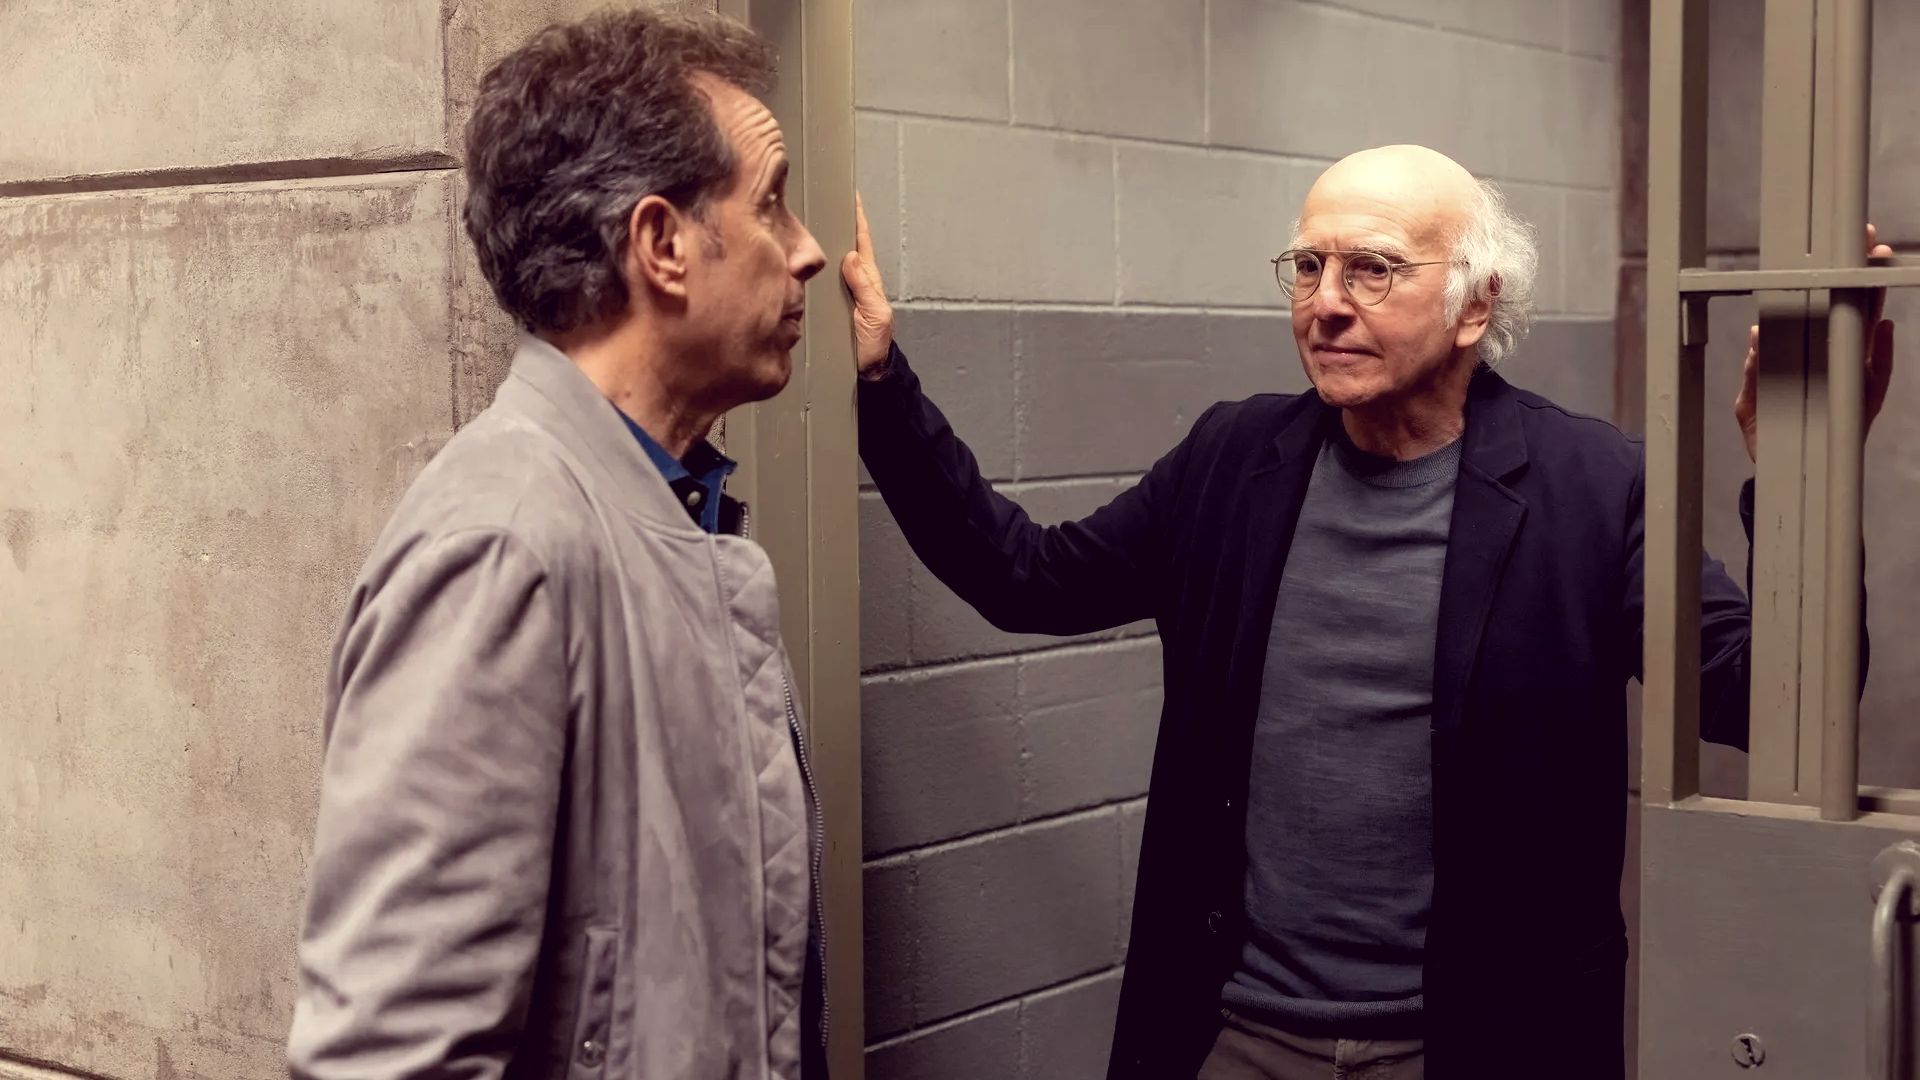 Jerry Seinfeld and Larry David in jail in the Curb Your Enthusiasm Finale